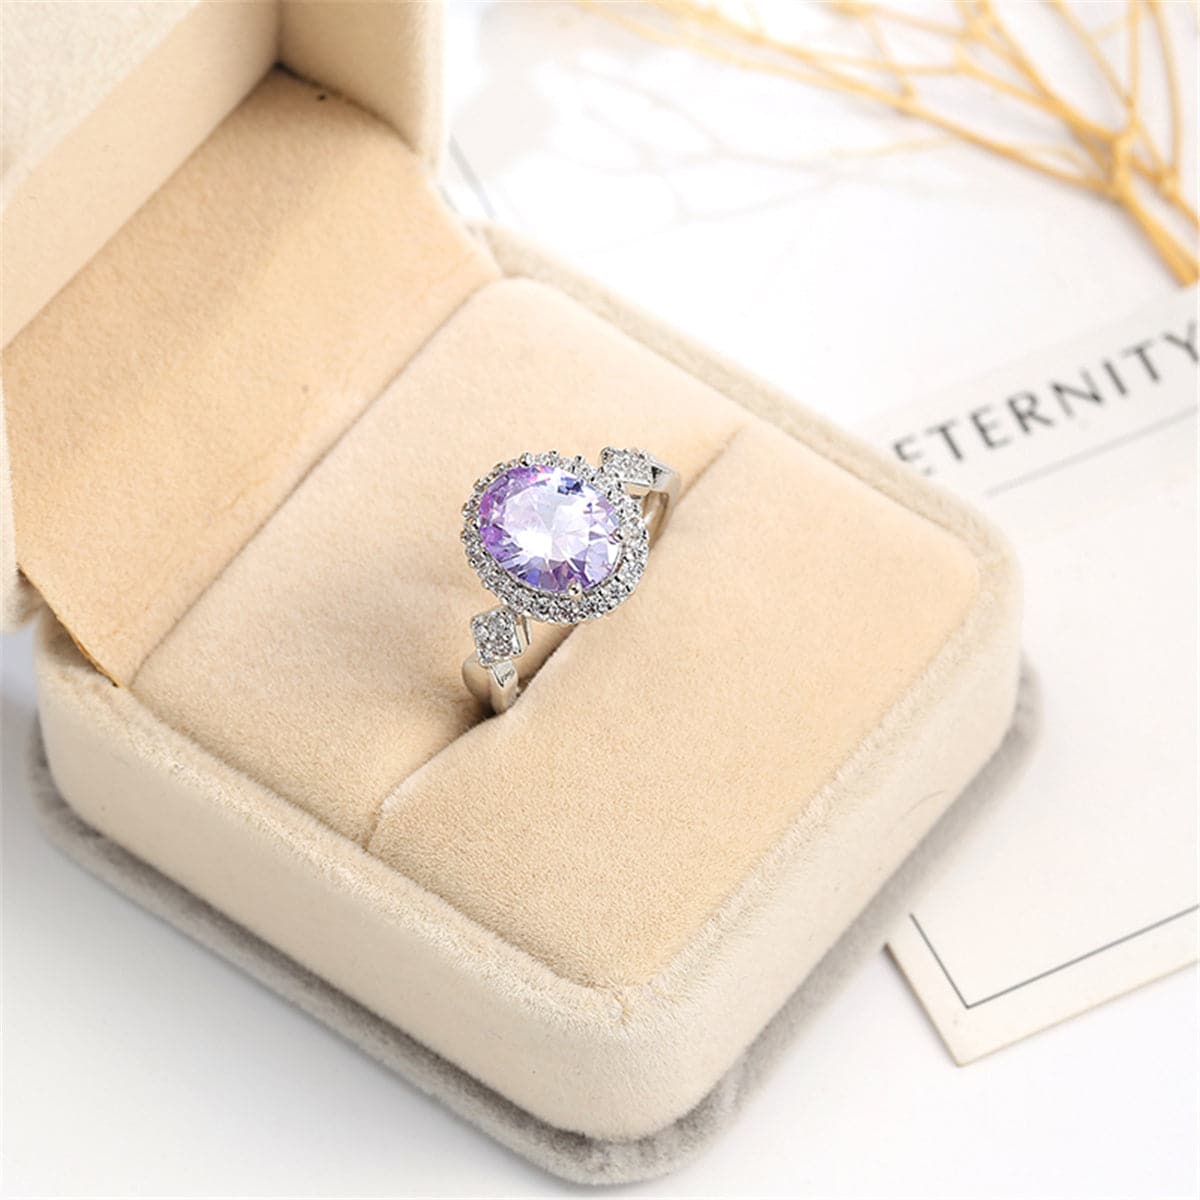 Purple Cubic Zirconia & Crystal Halo Oval Ring